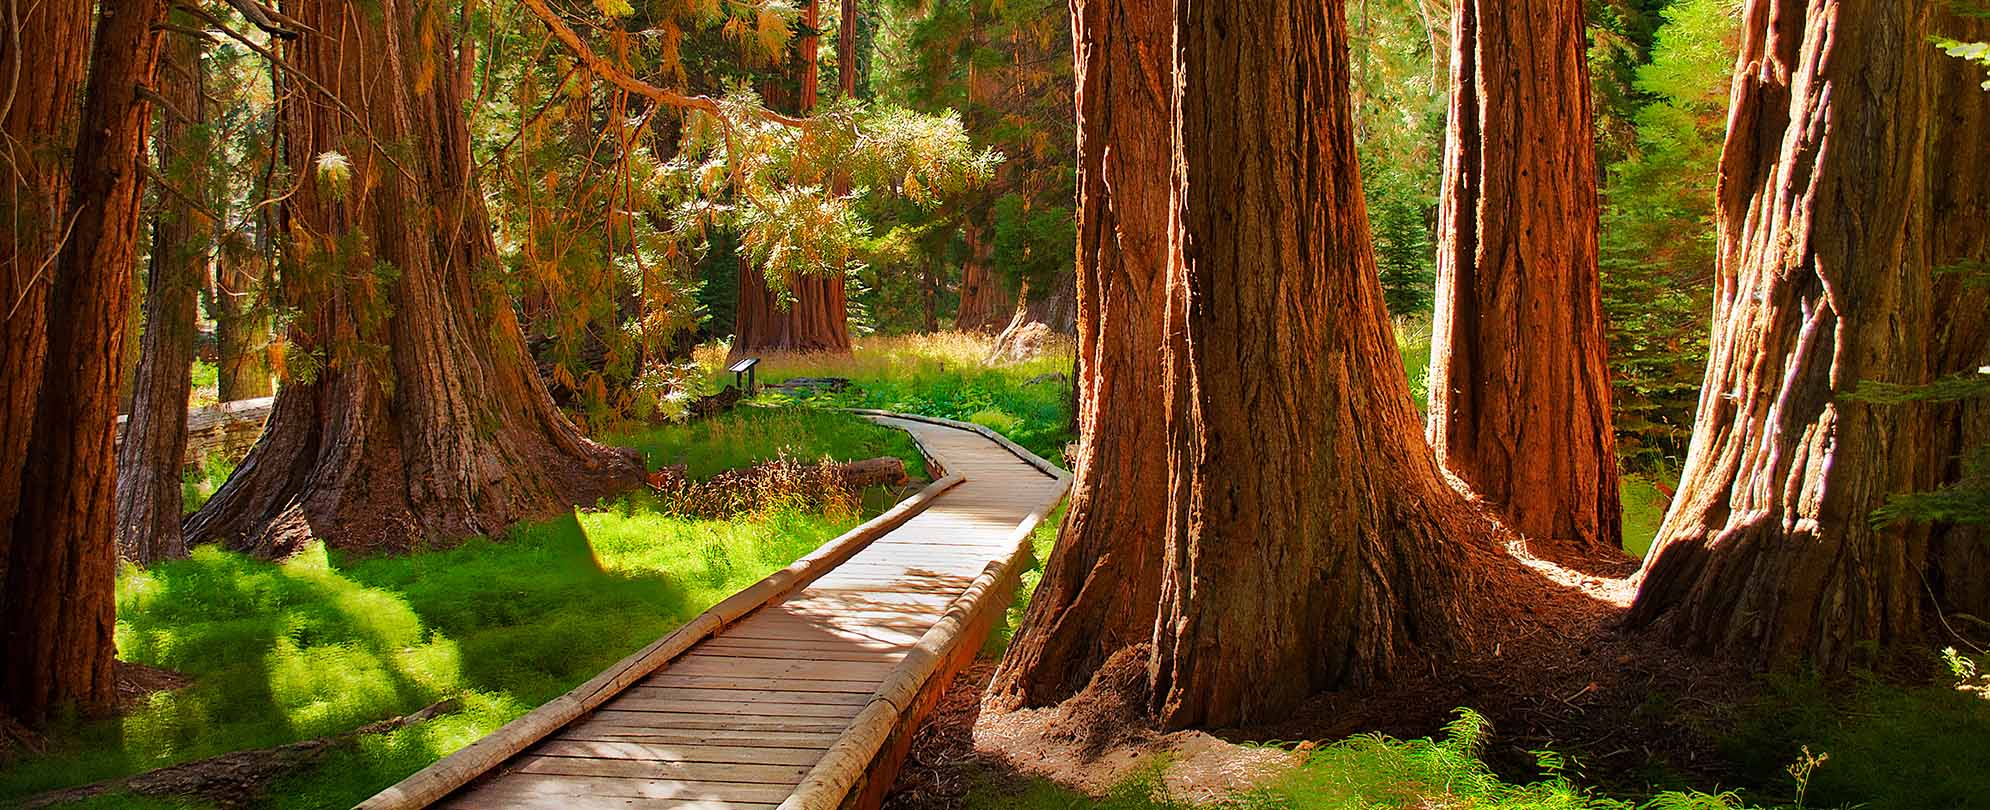 A wood walkway surrounded by large sequoia trees at Kings Canyon National Park, one of the most beautiful forests in America. 